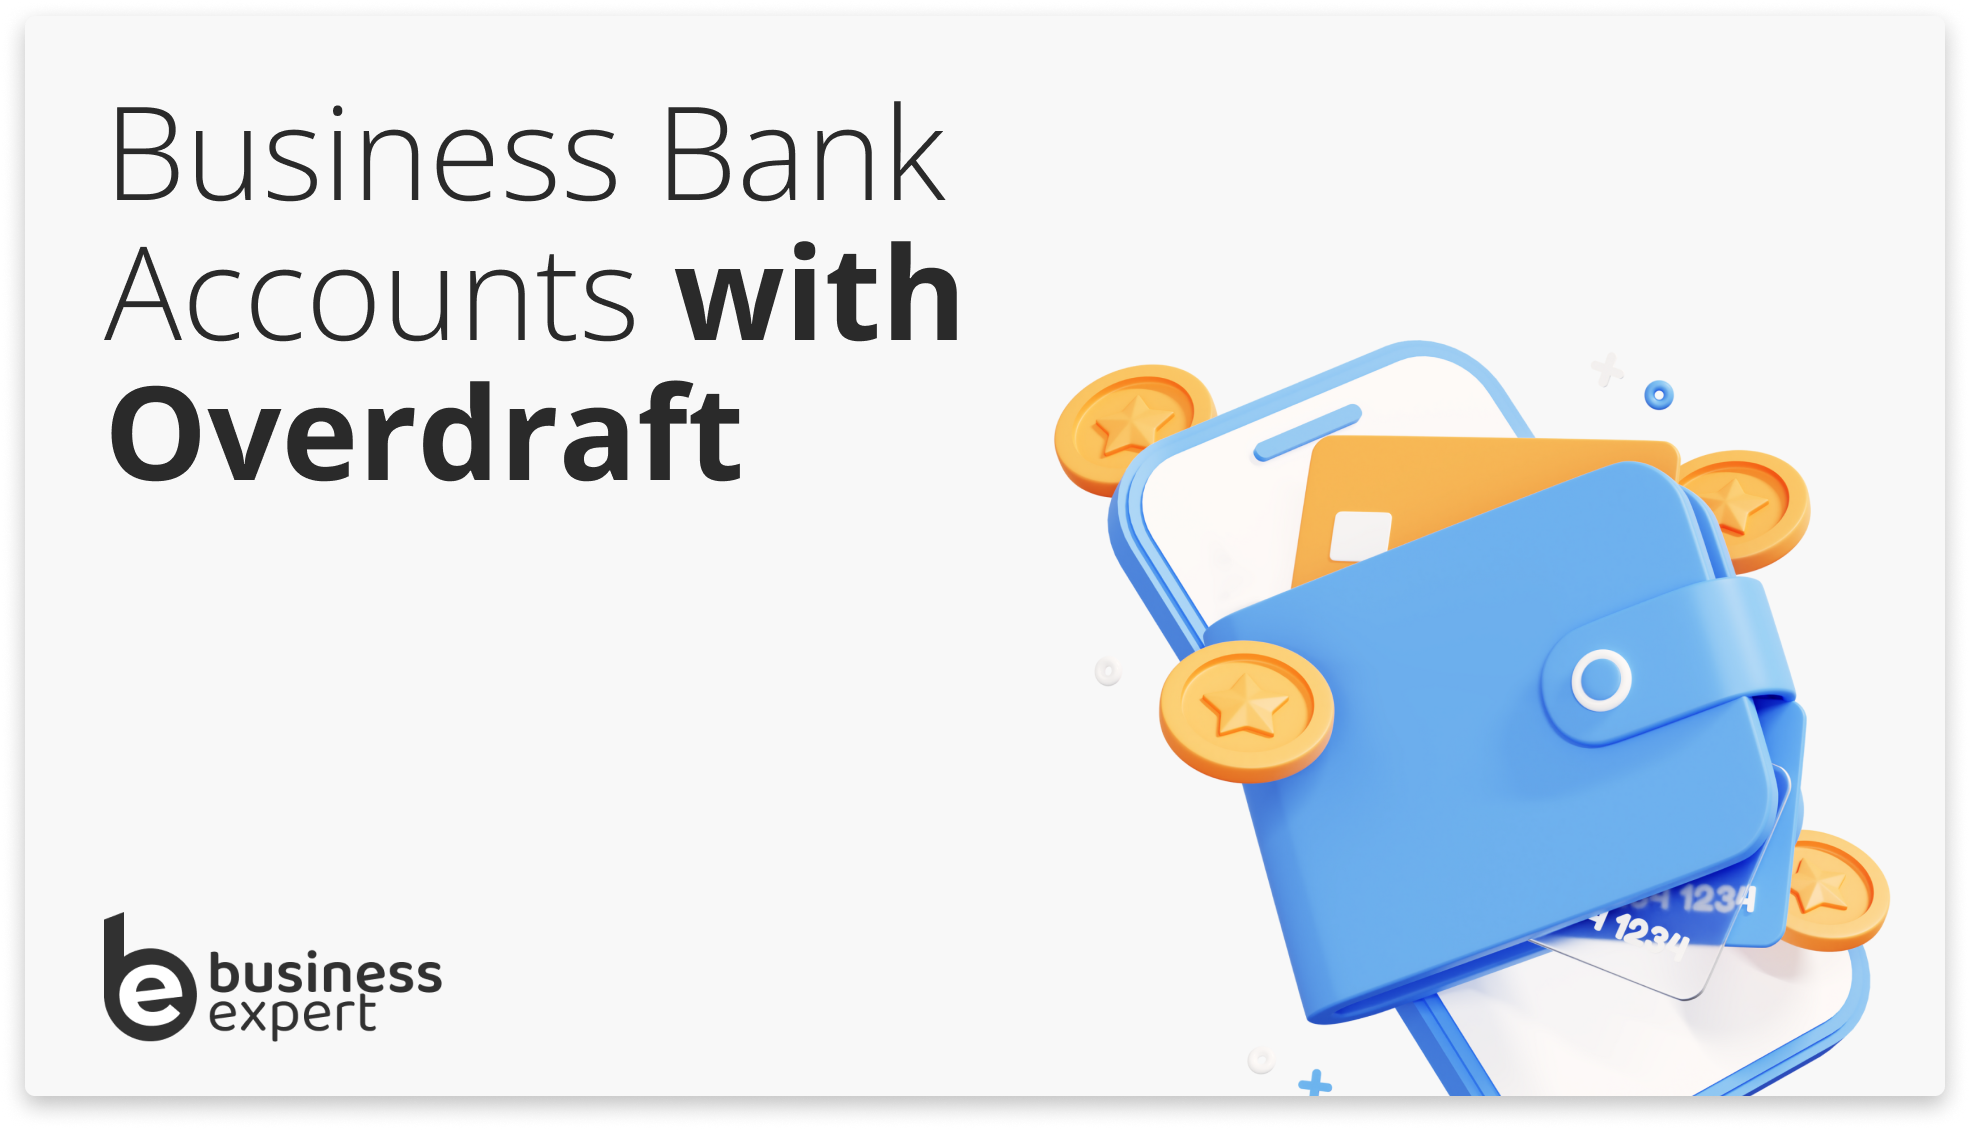 Business Bank Accounts with Overdraft